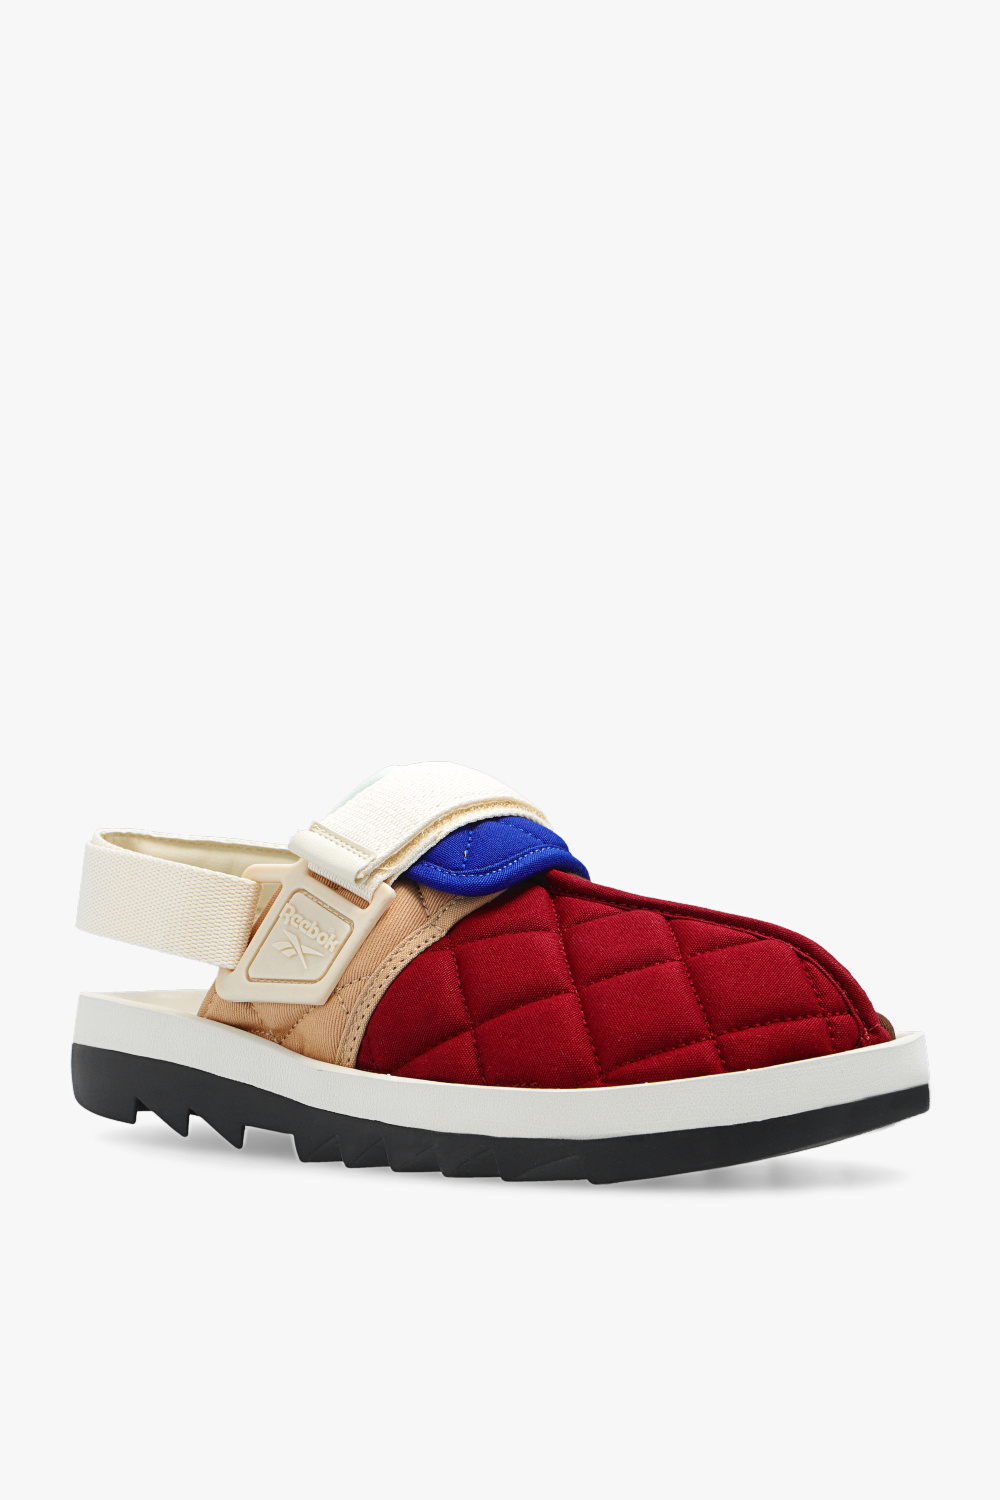 Reebok ‘Beatnik’ quilted shoes